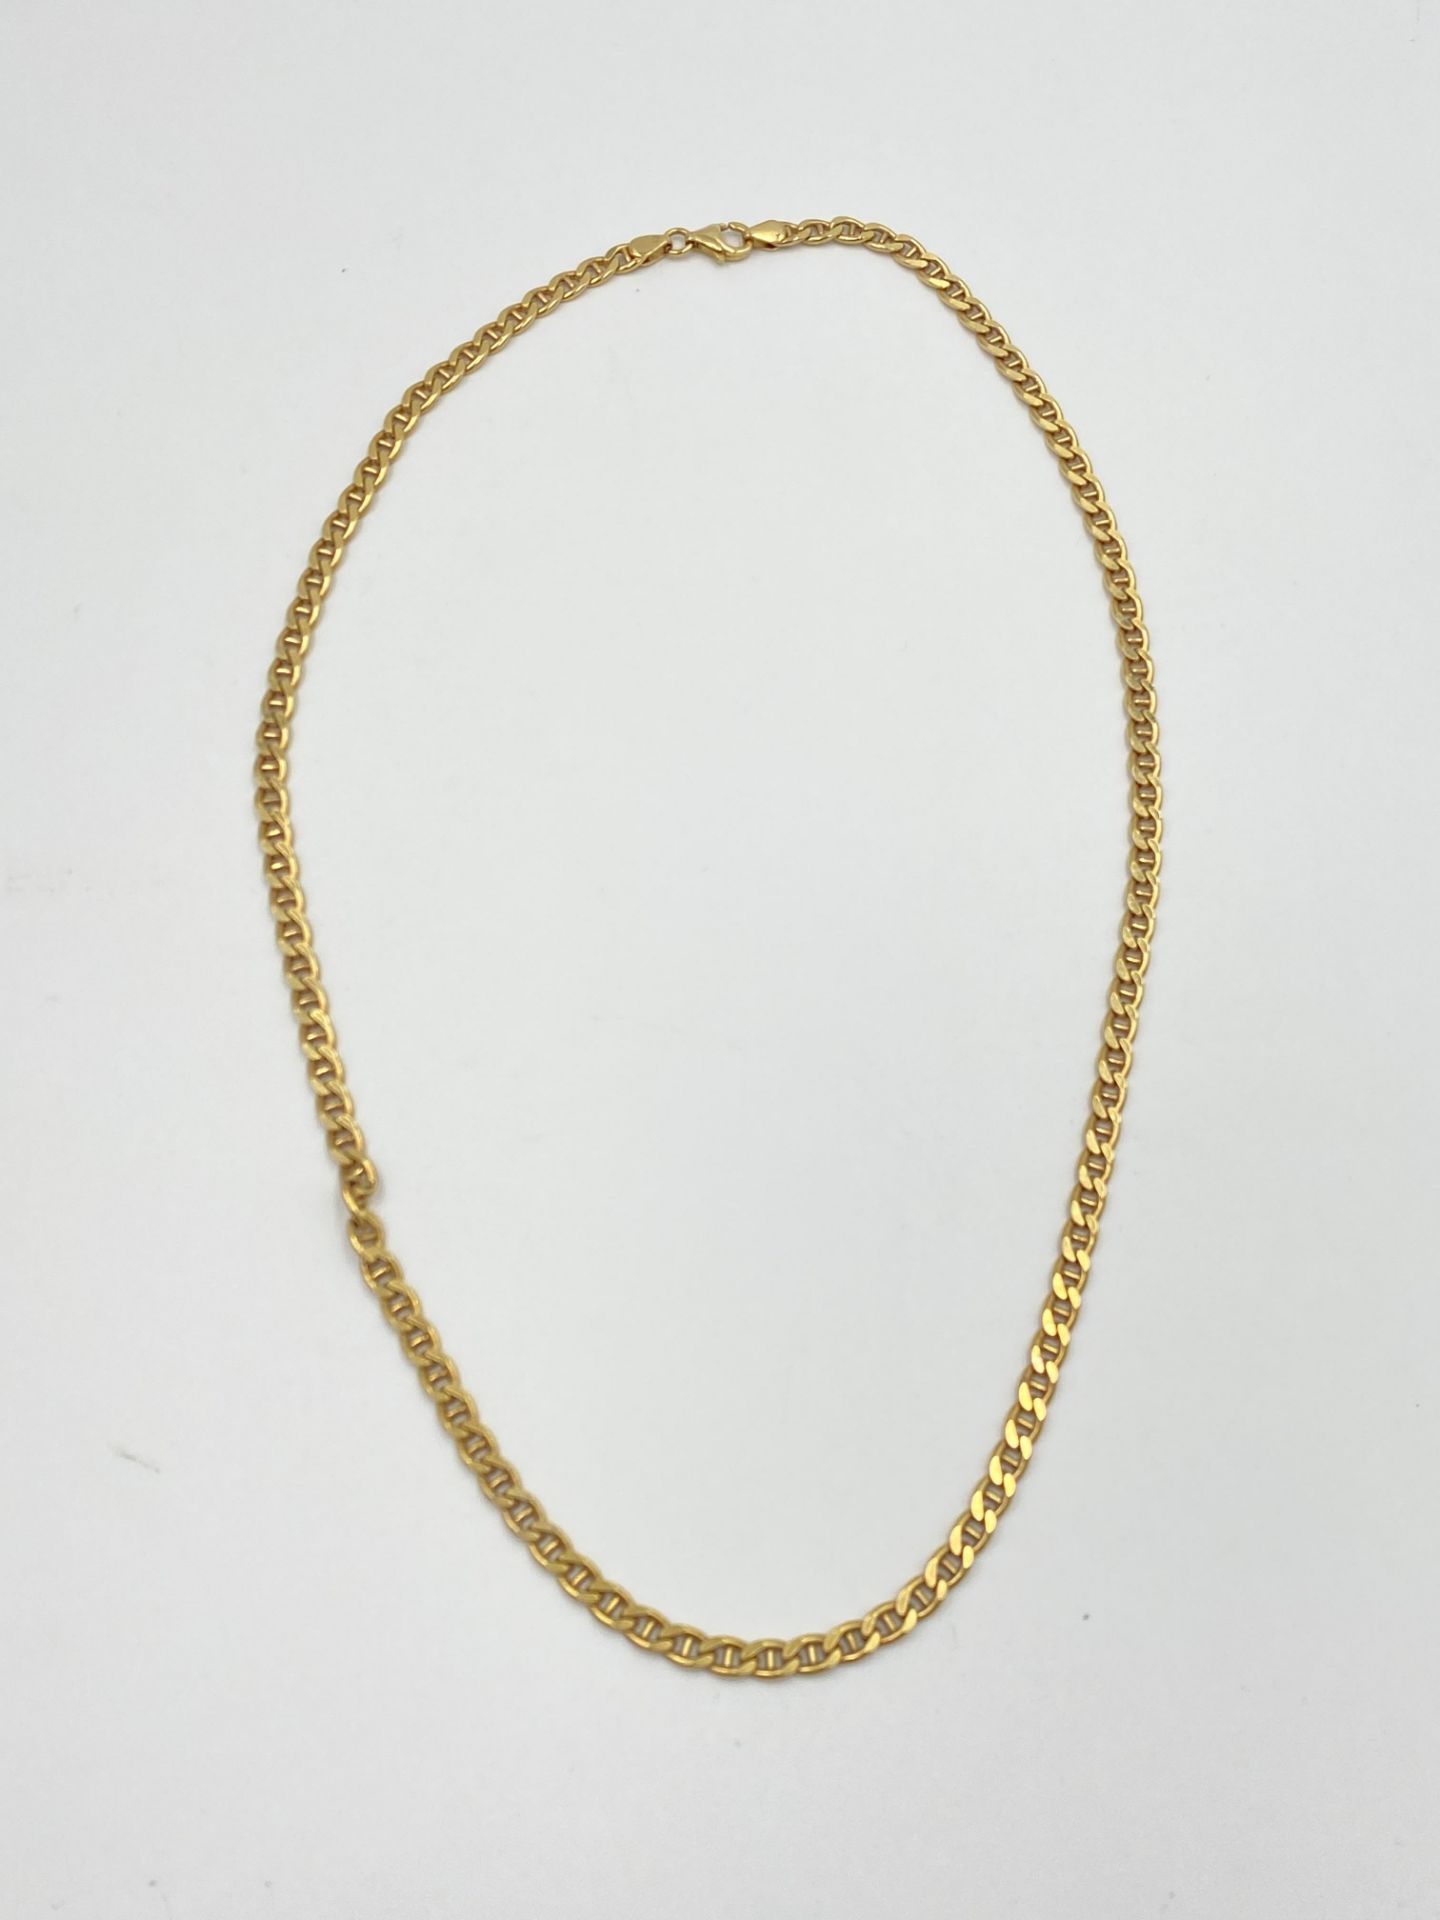 9ct gold link necklace - Image 2 of 3